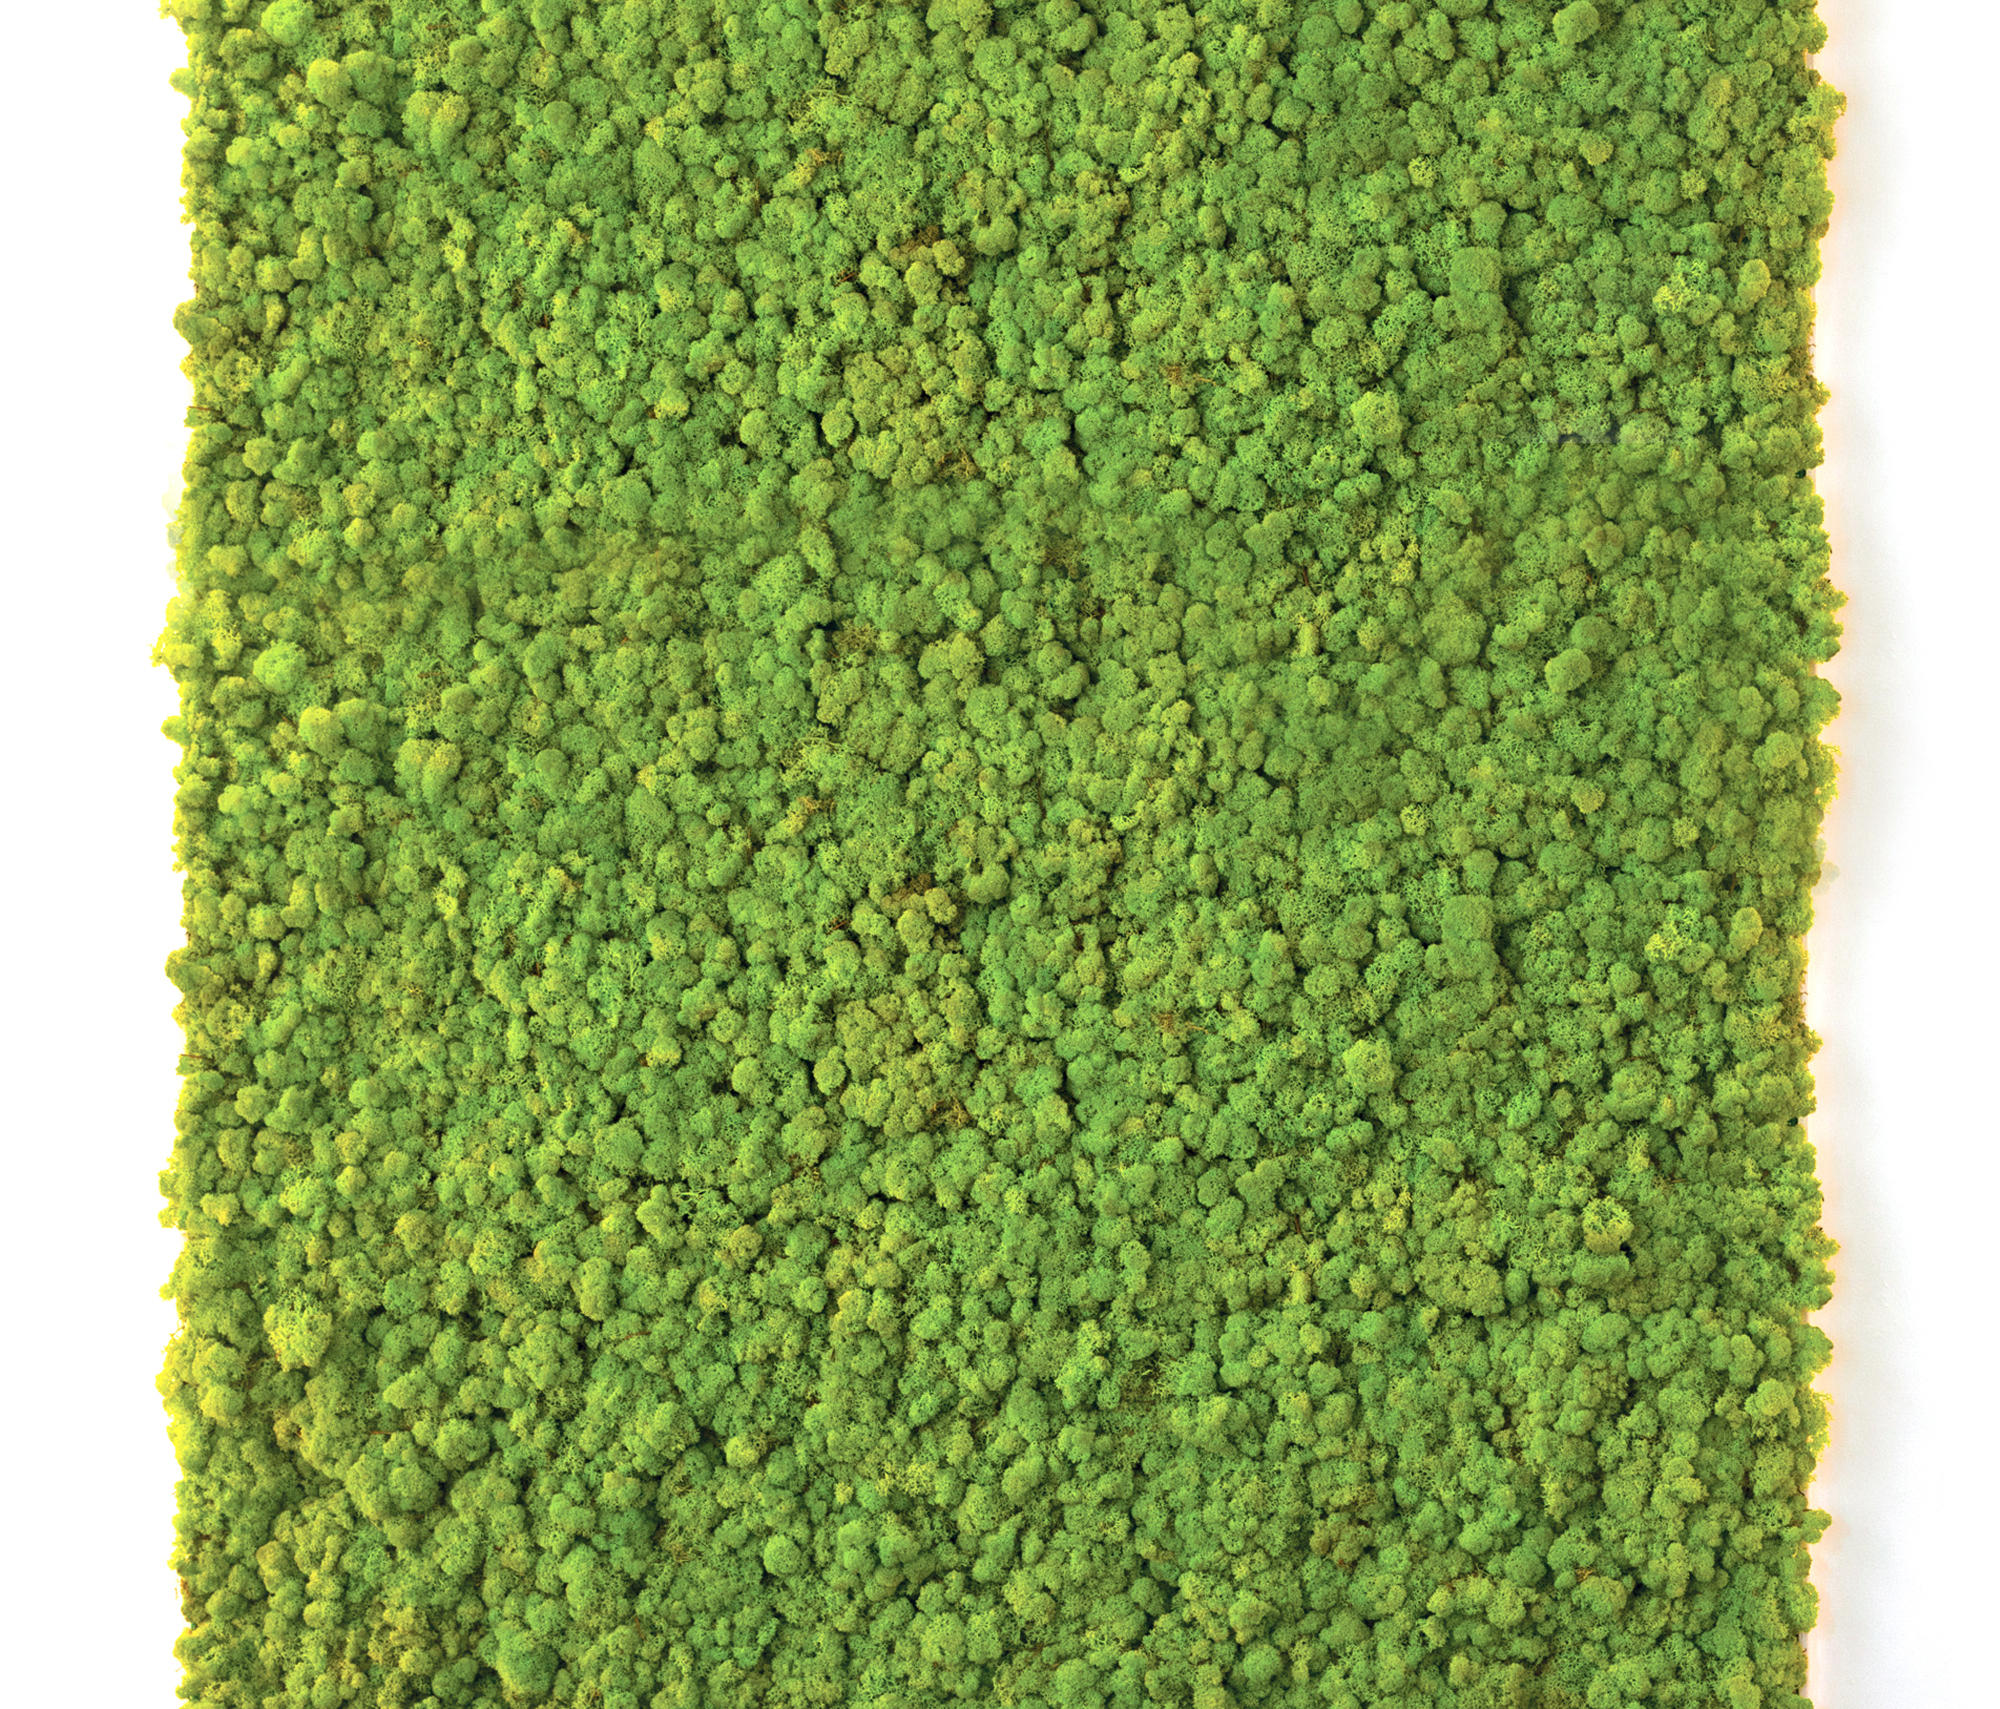 MOSS WALL - Living / Green walls from Verde Profilo | Architonic